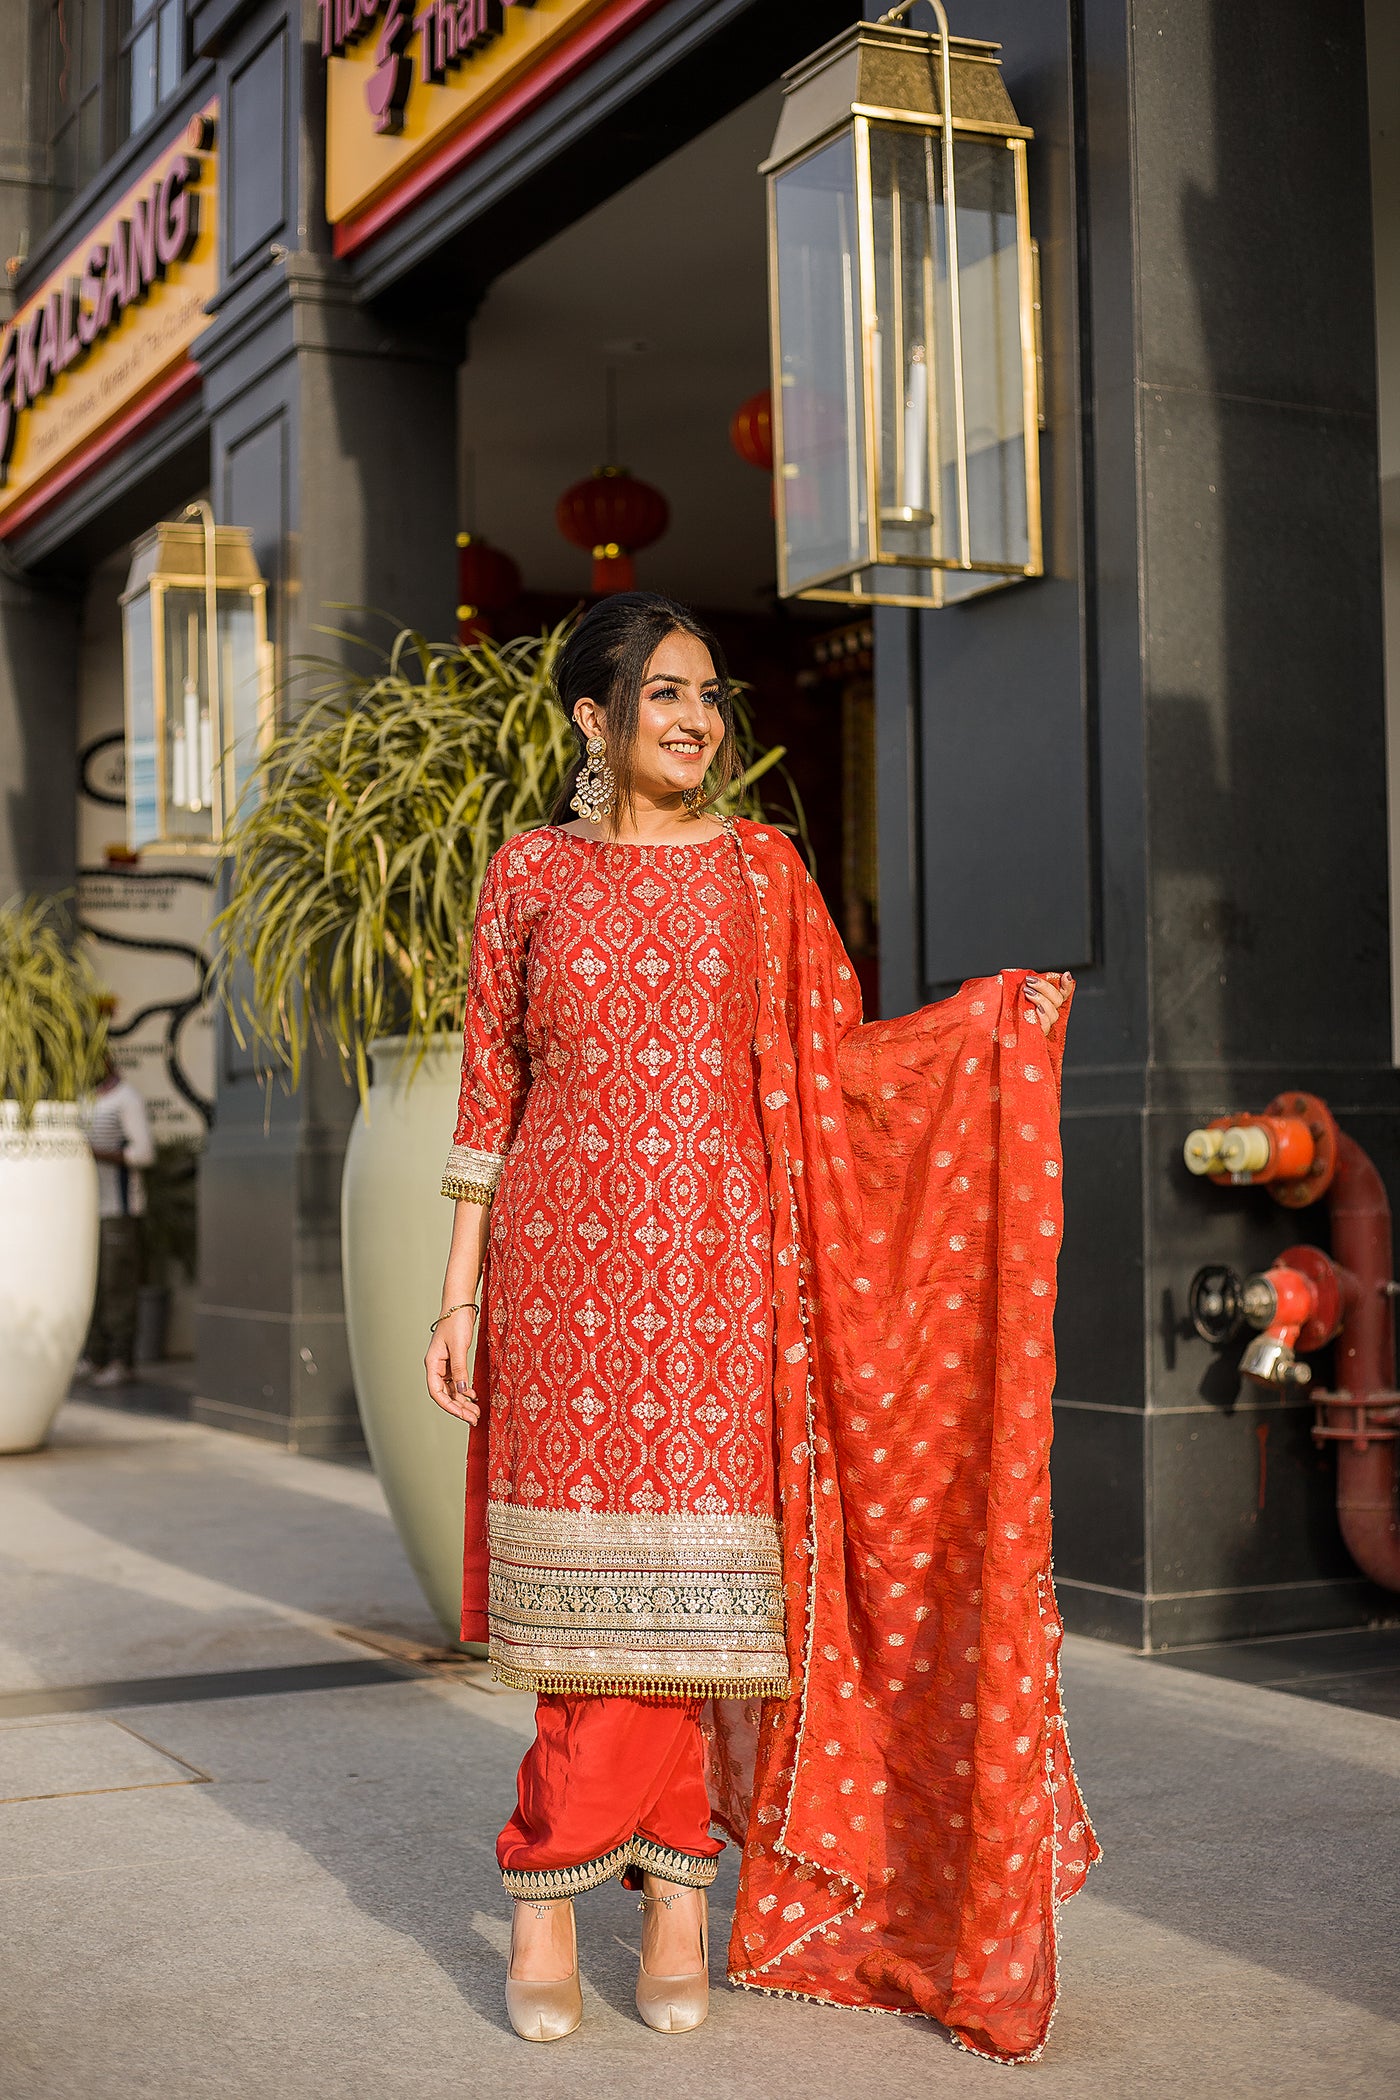 Red-Orange Embroidered Salwar Suit Indian Clothing in Denver, CO, Aurora, CO, Boulder, CO, Fort Collins, CO, Colorado Springs, CO, Parker, CO, Highlands Ranch, CO, Cherry Creek, CO, Centennial, CO, and Longmont, CO. NATIONWIDE SHIPPING USA- India Fashion X